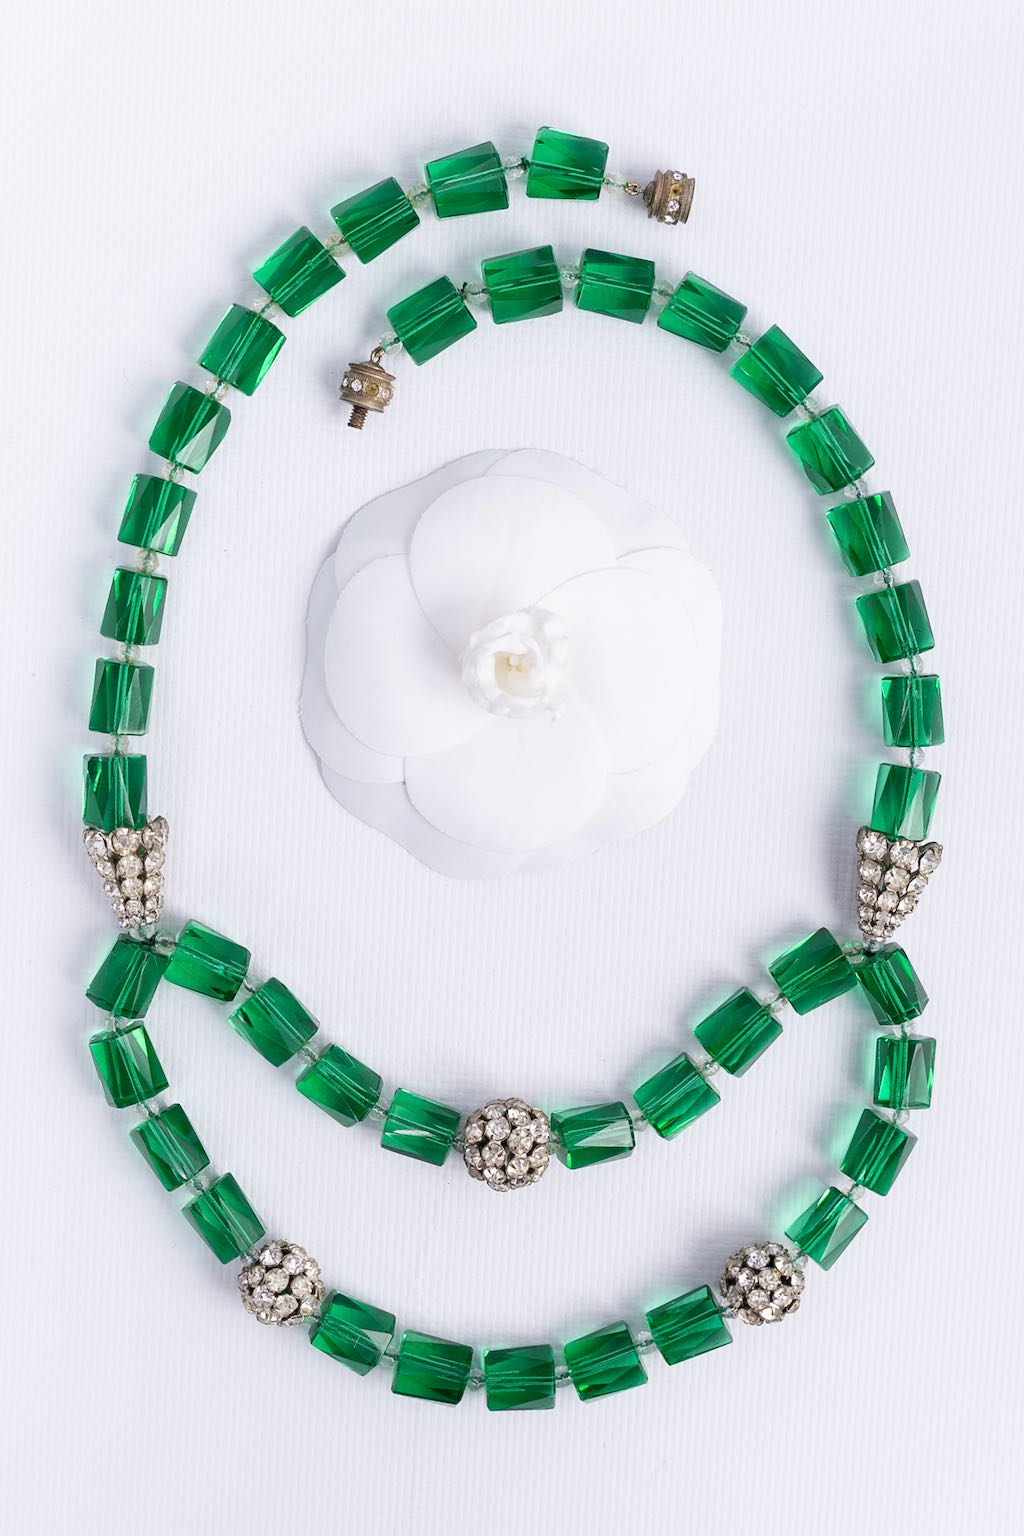 Chanel necklace with glass beads and rhinestones